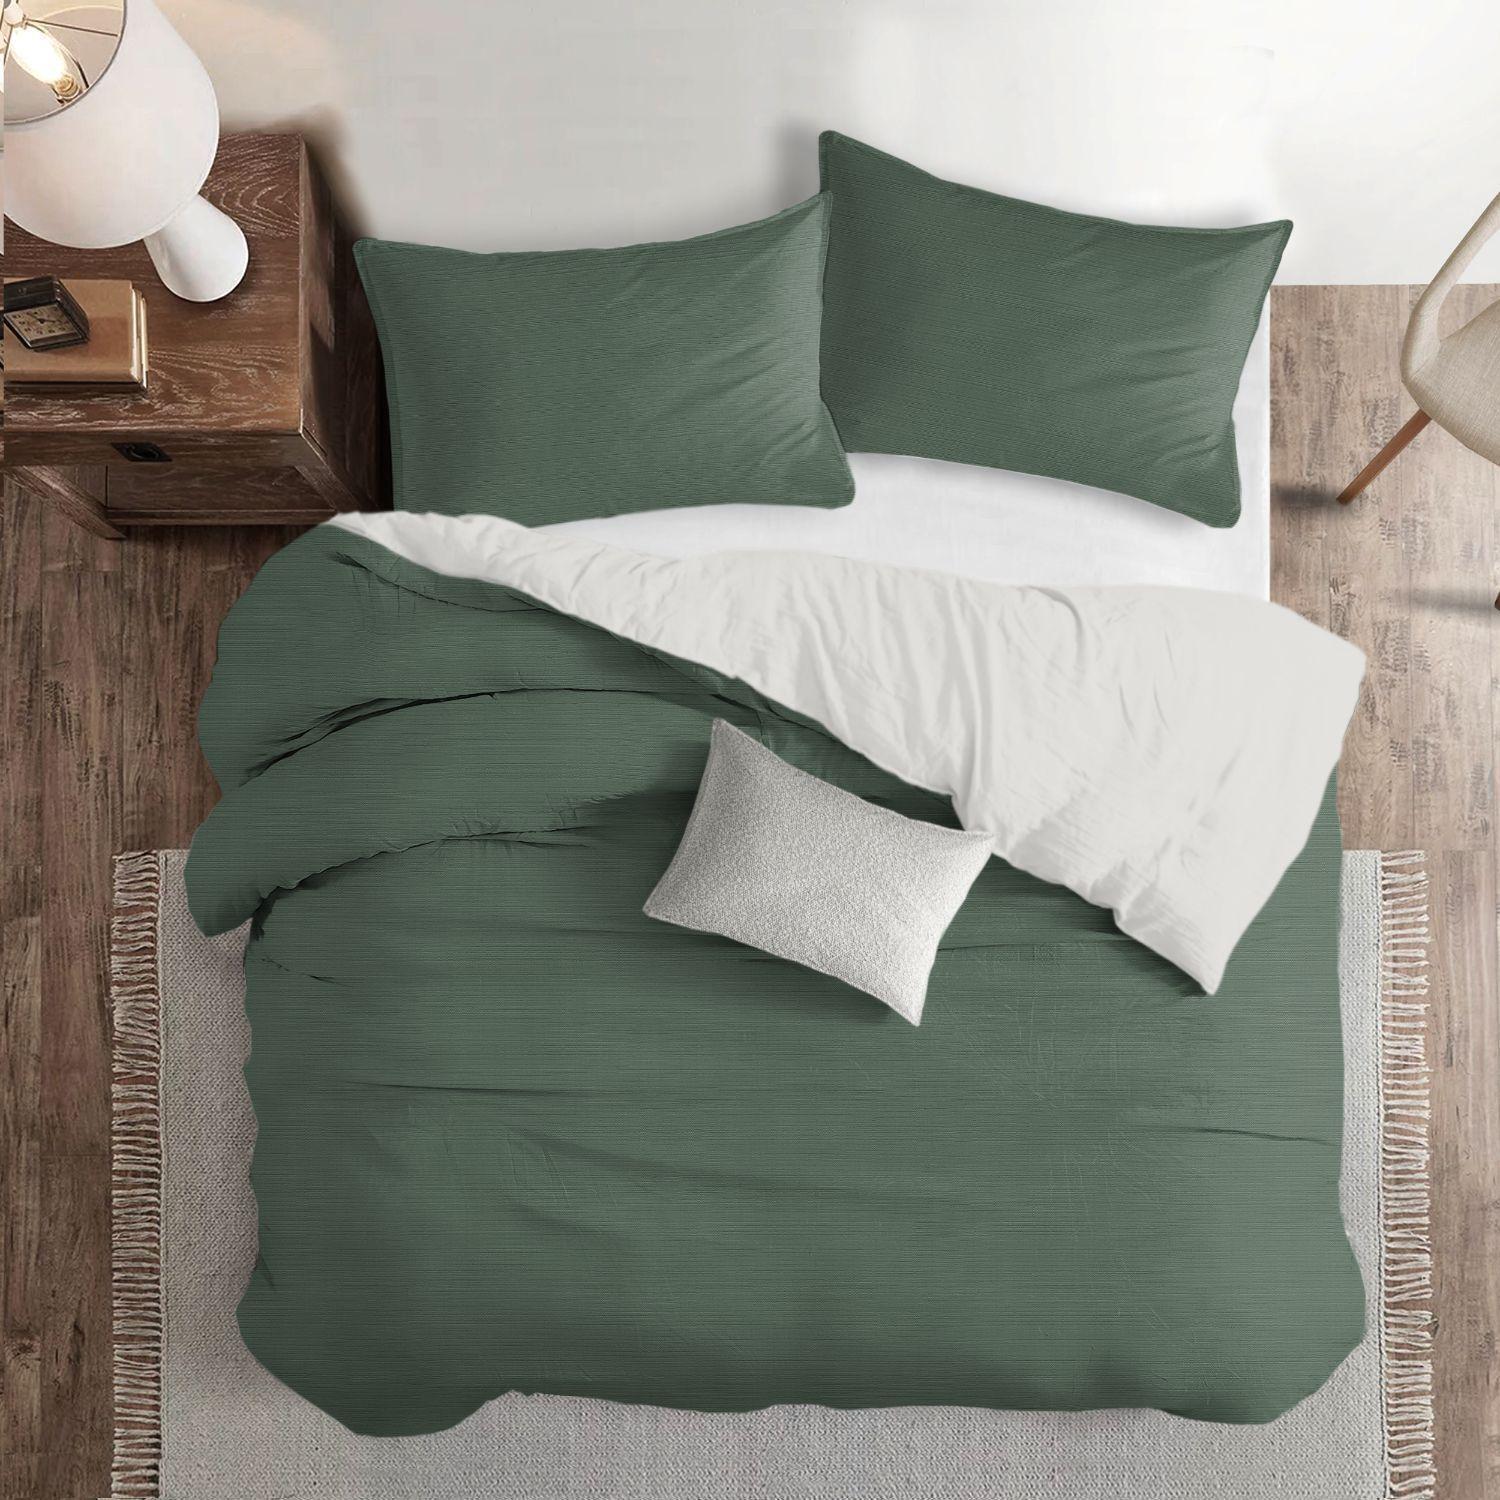 Set of 3 Green Solid Comforter with Pillow Shams - Super King Size alternate image